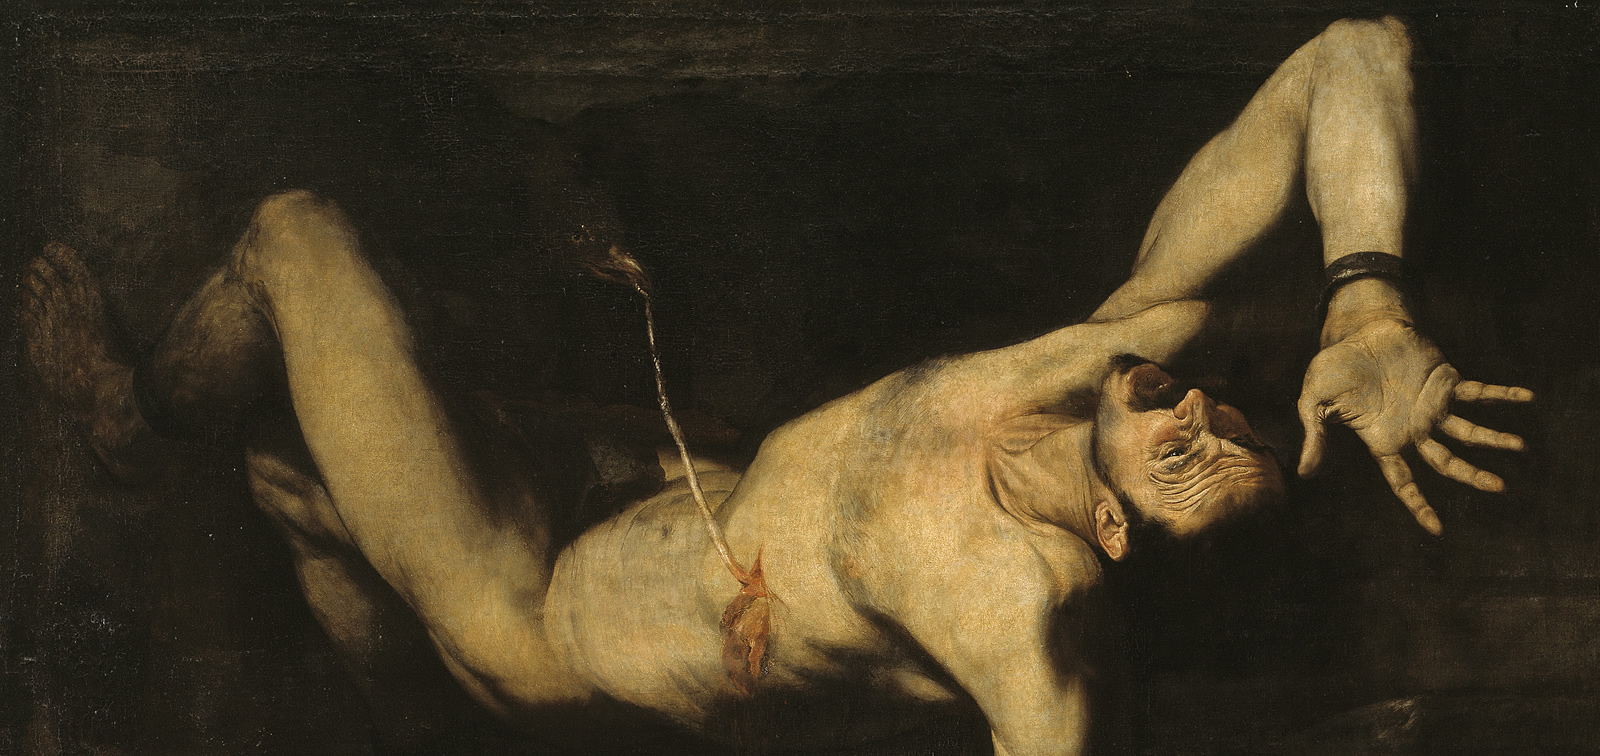 The "Furias". From Titian to Ribera